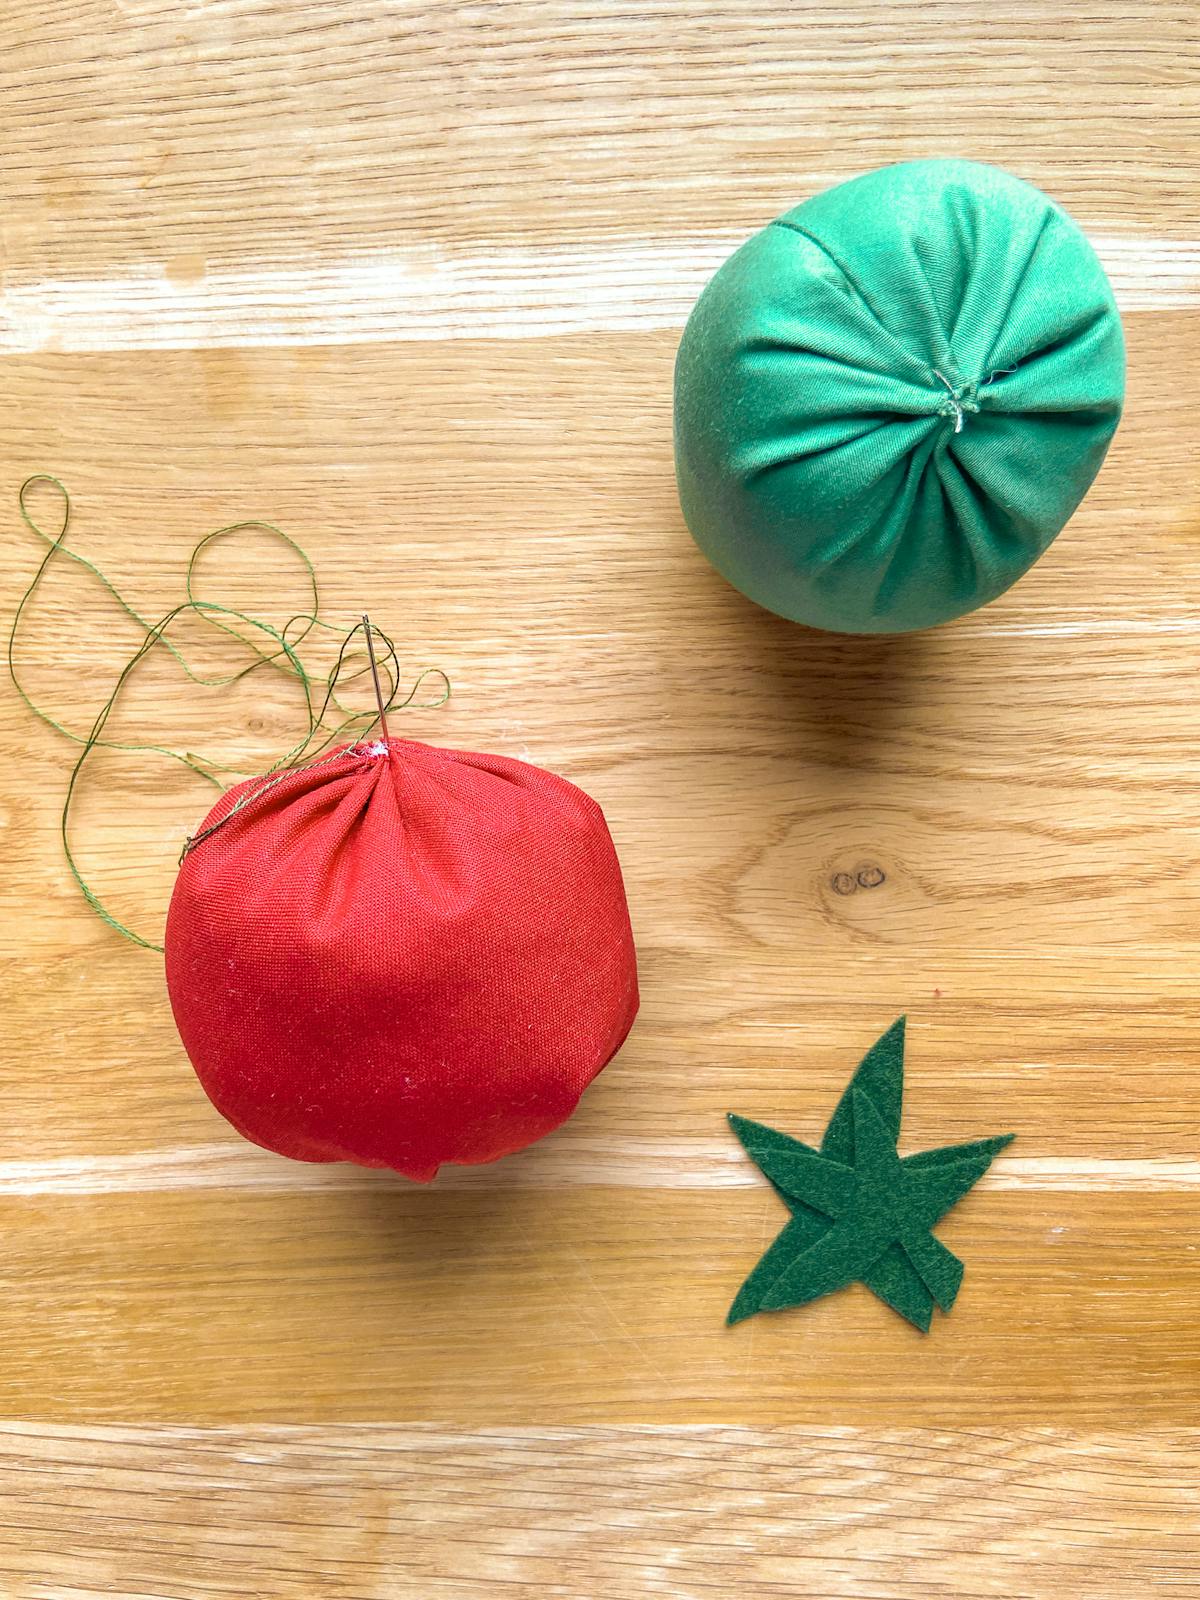  Finishing DIY tomato pin cushions in red and green. Adding segments.